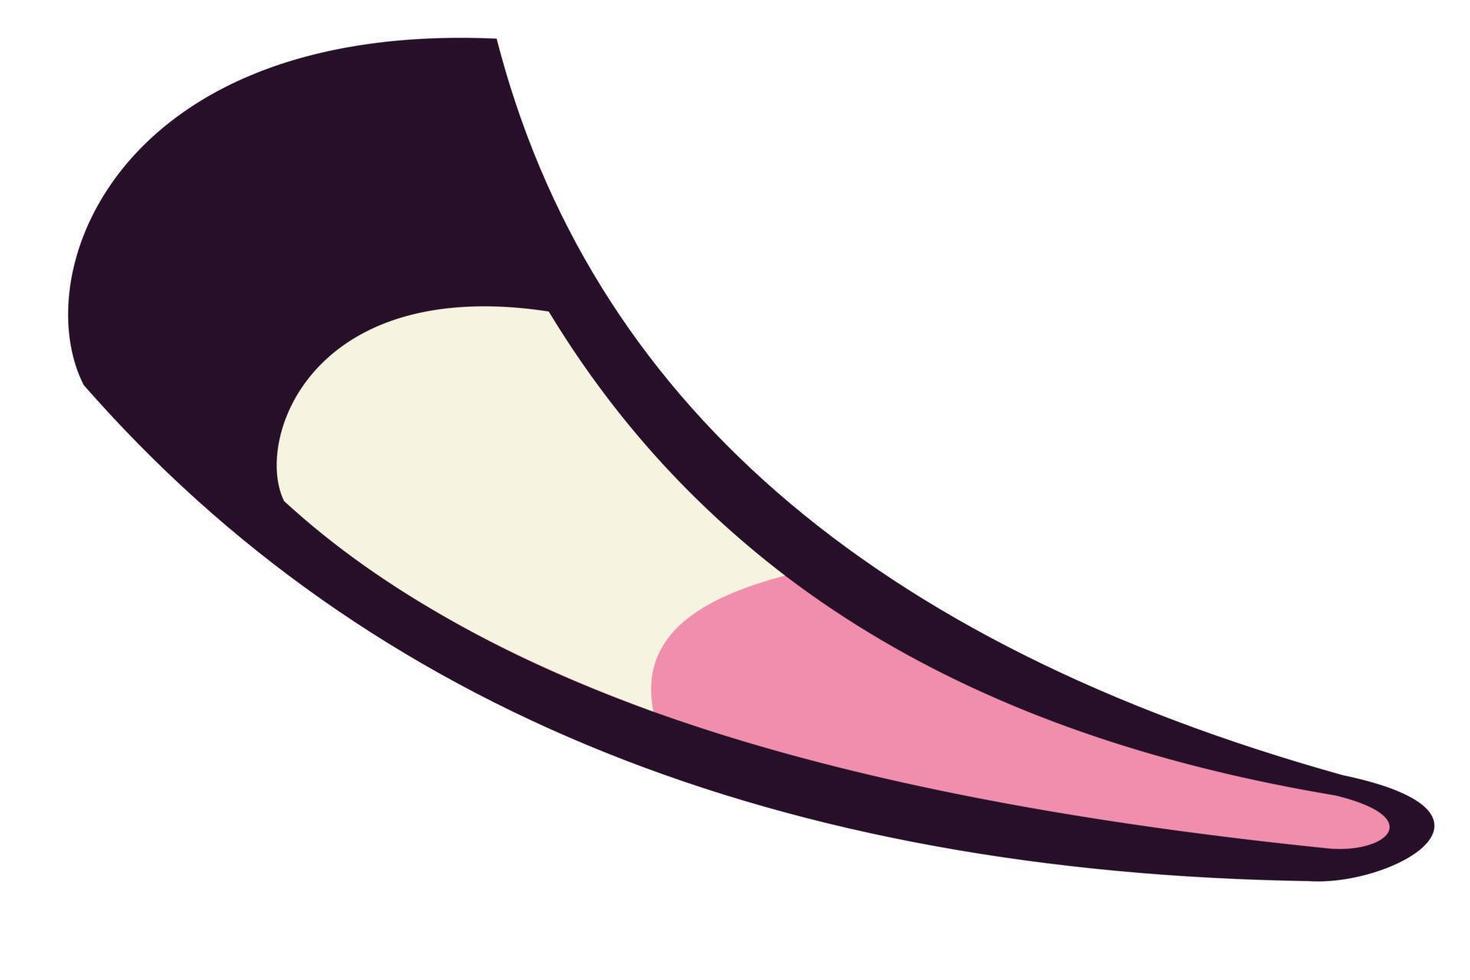 Vector illustrations of the tail pendulum of cats, wolves, ferrets or similar cute animals. pink color.